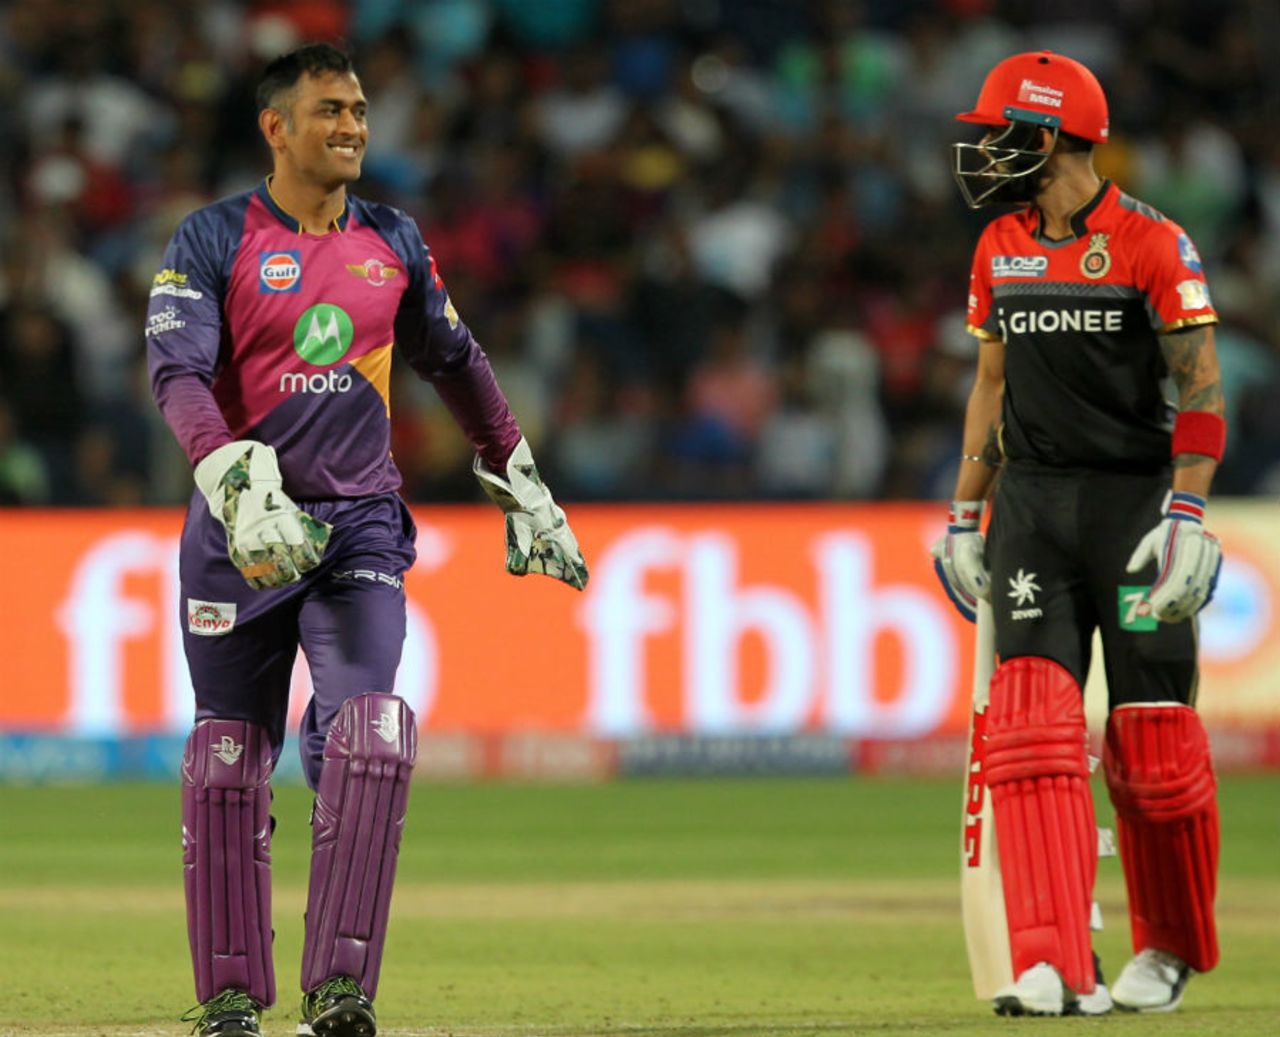 A tale of two expressions - MS Dhoni nice and relaxed as a fuming Virat Kohli looks on, Rising Pune Supergiant v Royal Challengers Bangalore, IPL 2017, Pune, April 29, 2017